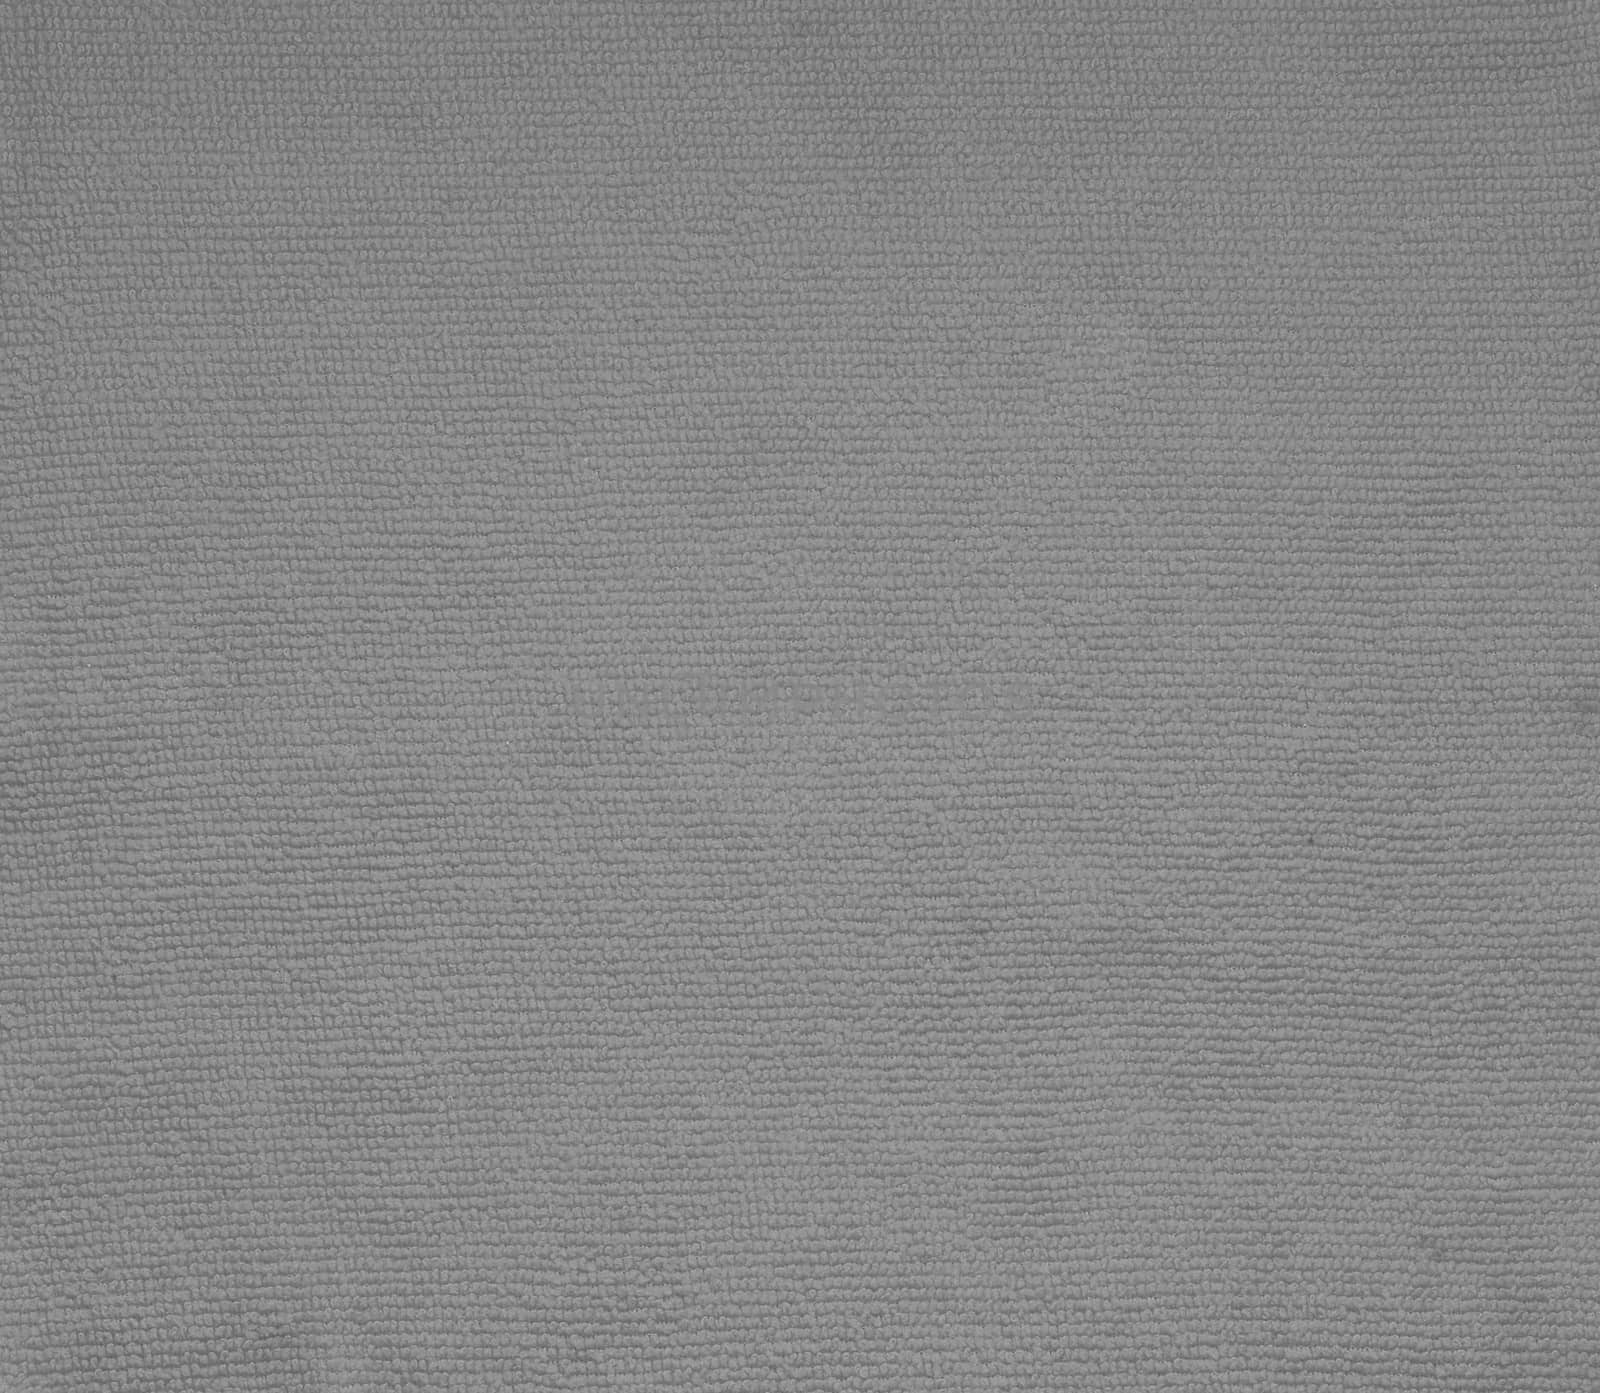 surface grey fabric texture for background